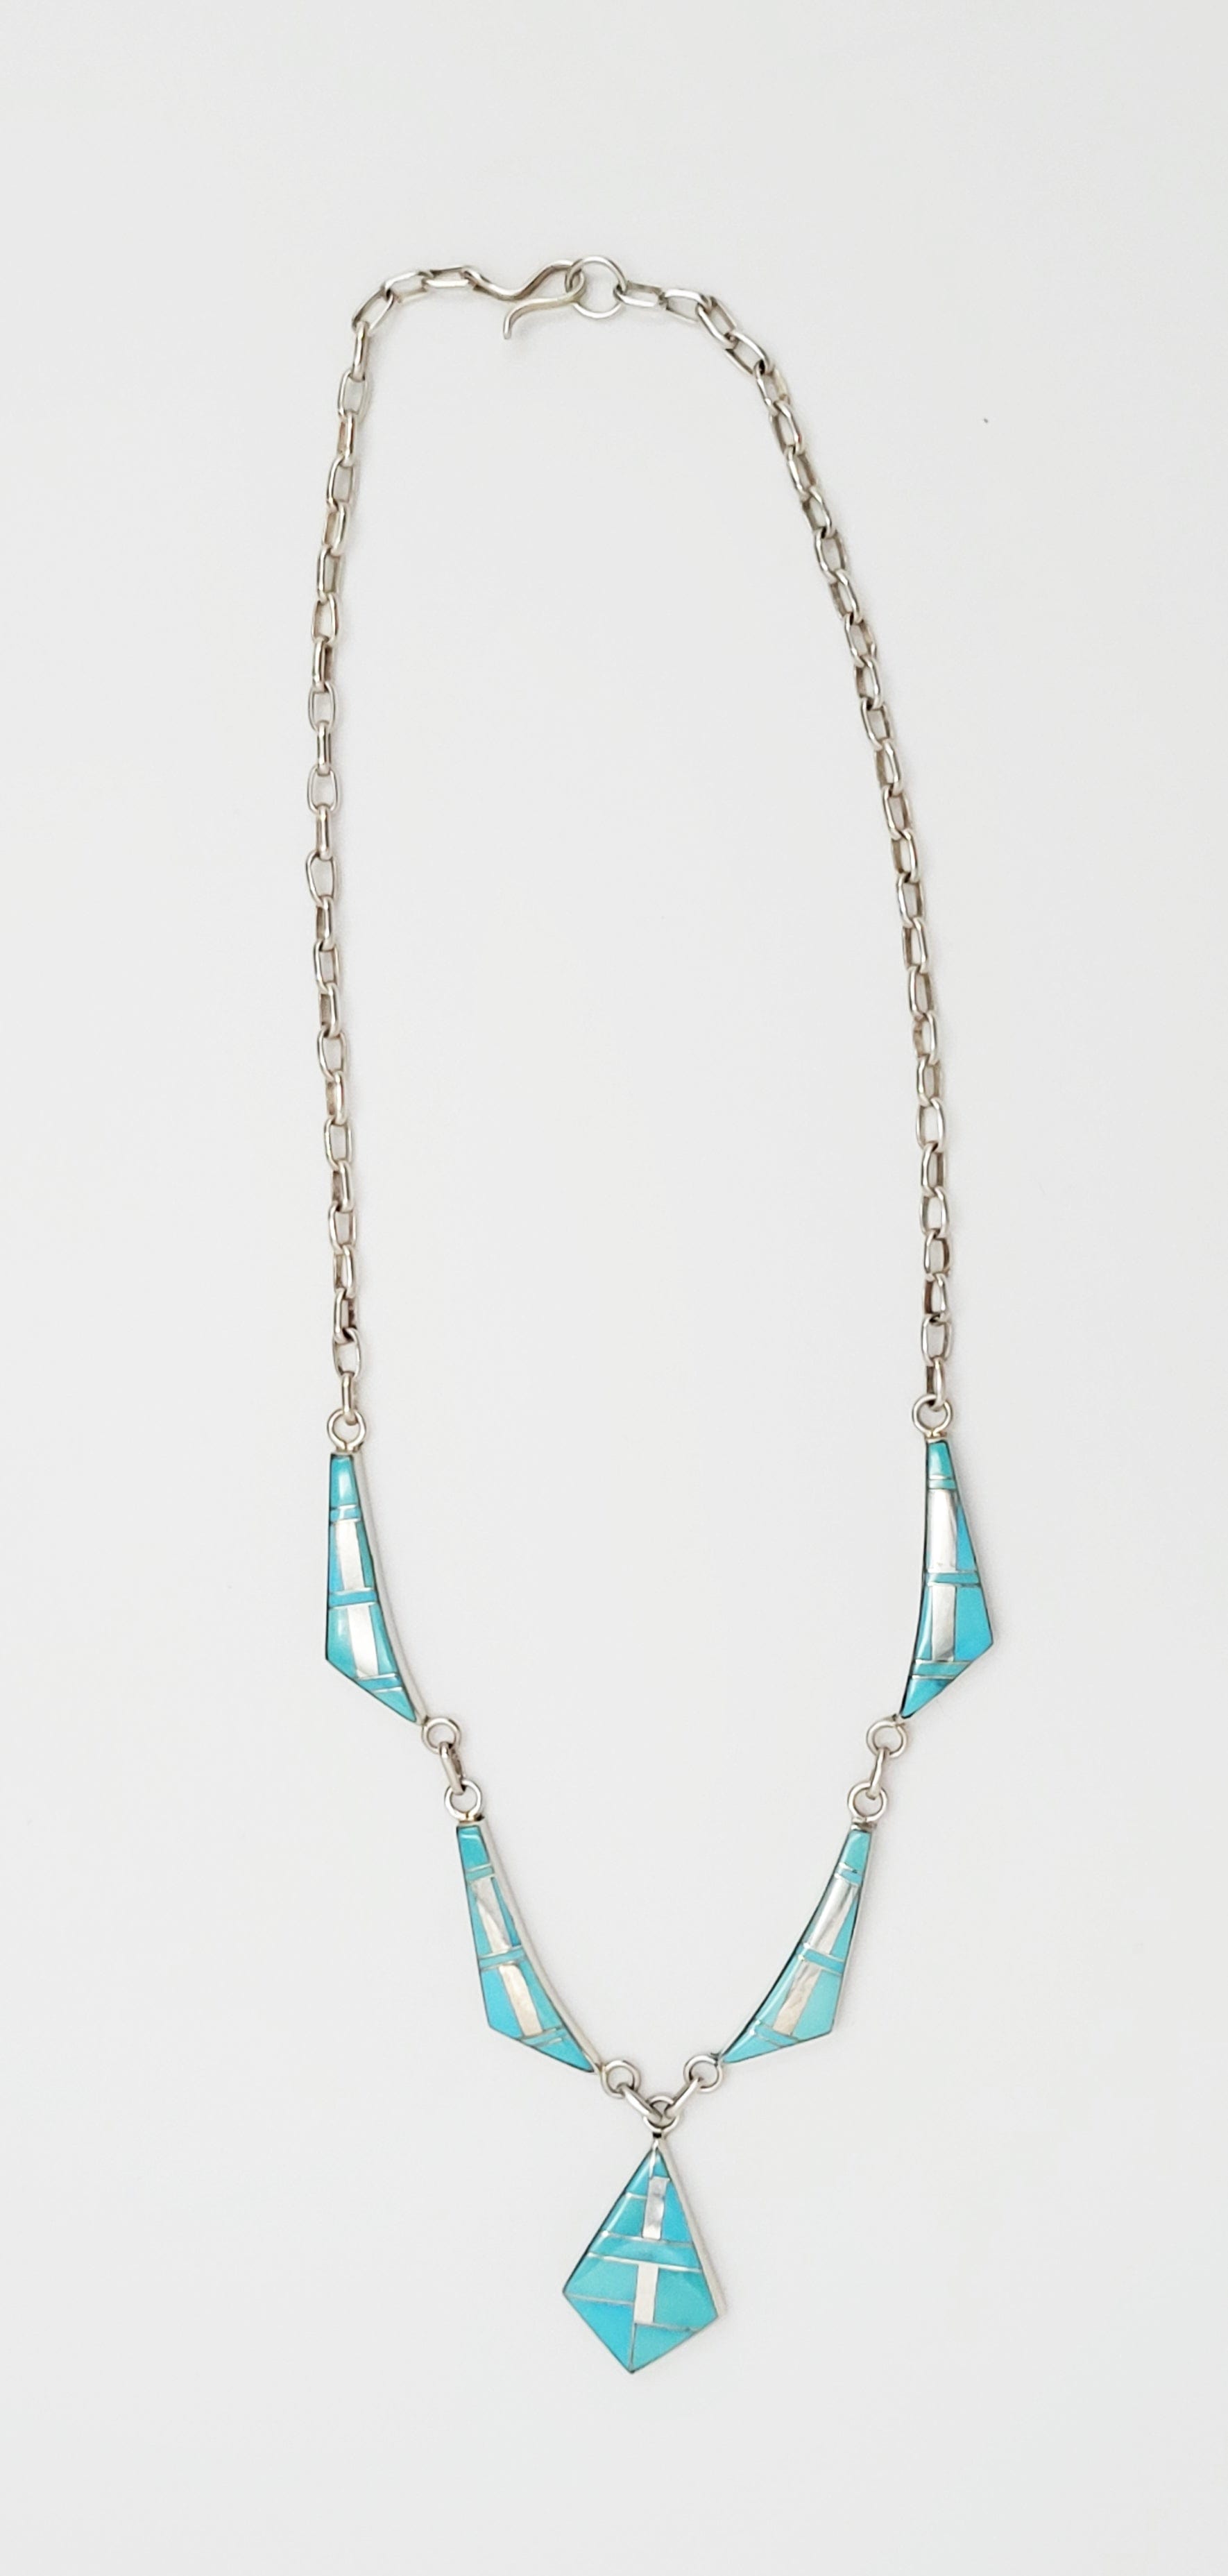 DM Begay Jewelry Navajo Artist DM Begay Sterling Silver Turquoise Modernist Necklace Circa 1990s